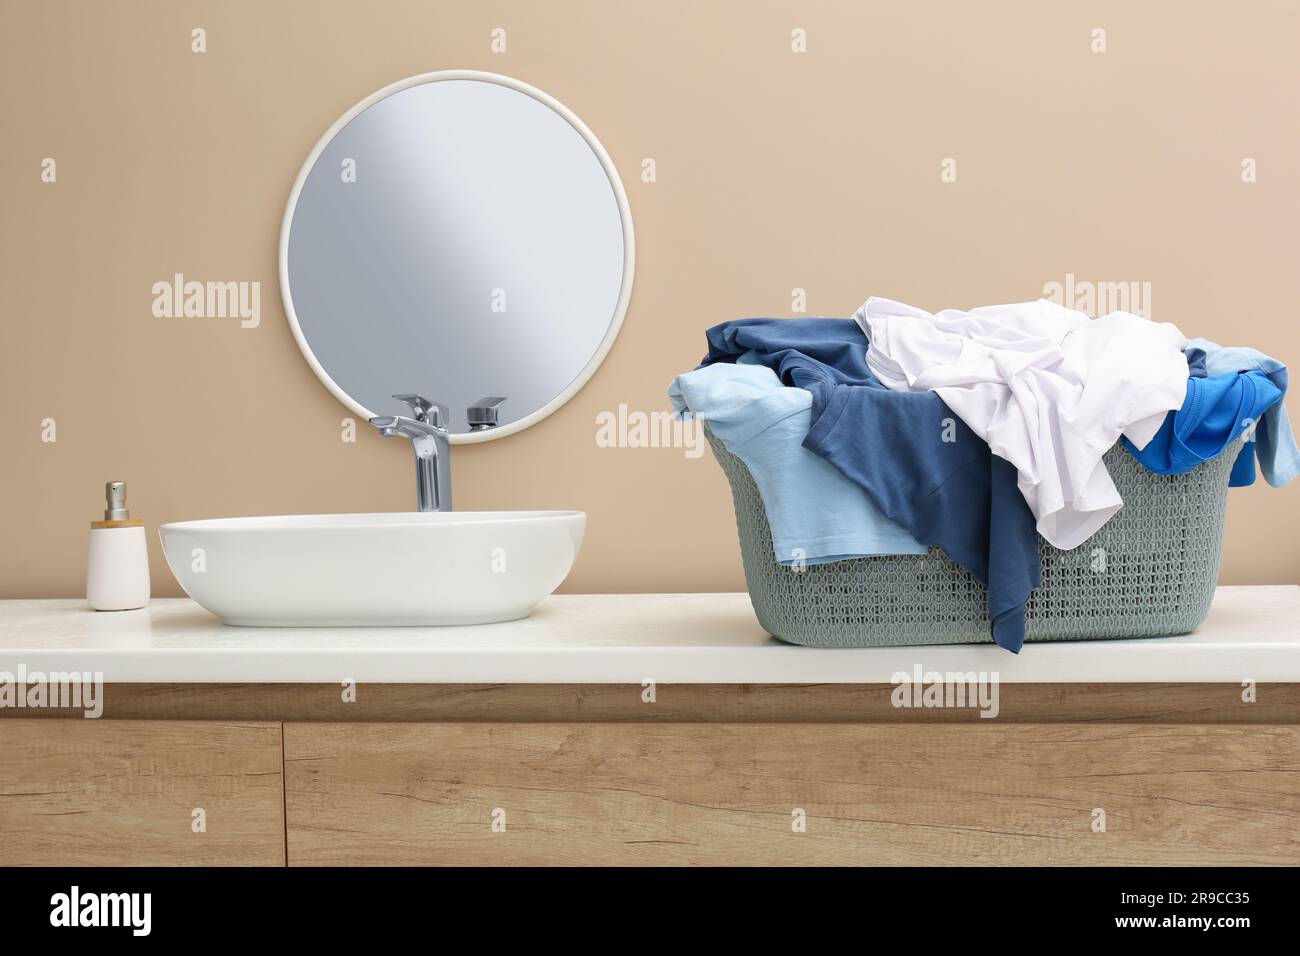 Plastic laundry basket overfilled with clothes on countertop in bathroom Stock Photo